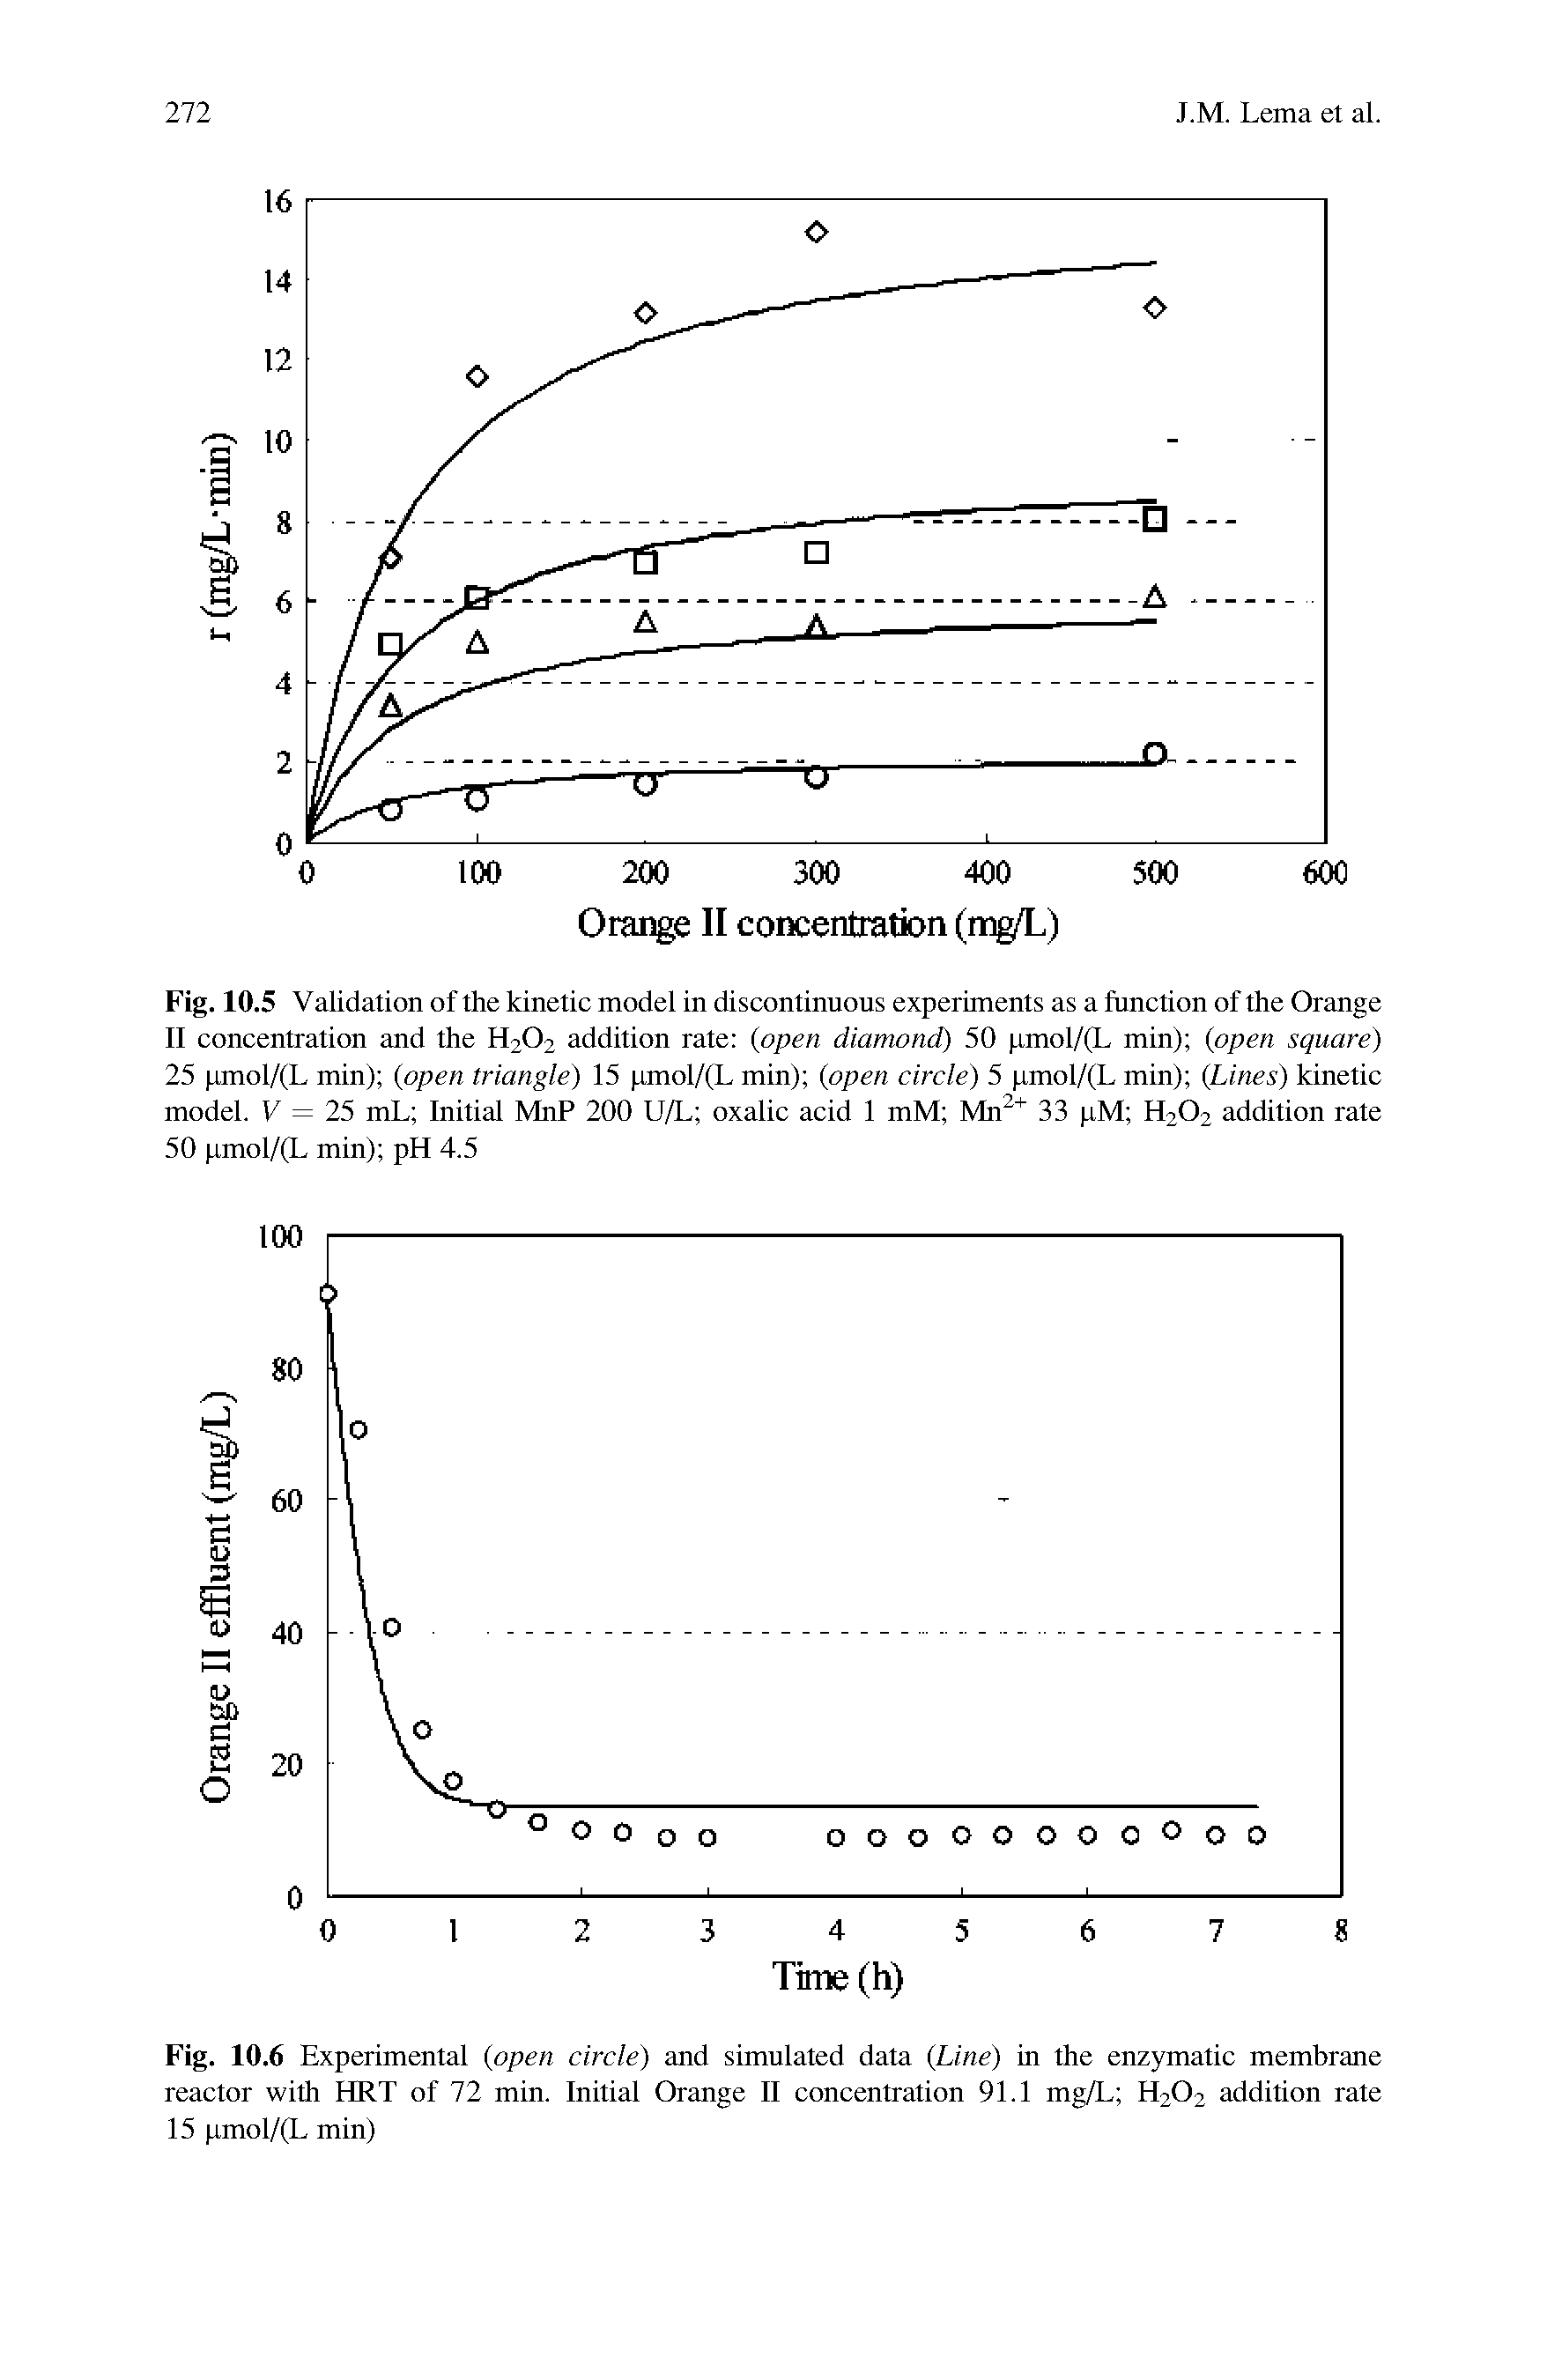 Fig. 10.6 Experimental (open circle) and simulated data (Line) in the enzymatic membrane reactor with HRT of 72 min. Initial Orange II concentration 91.1 mg/L H202 addition rate 15 pmol/(L min)...